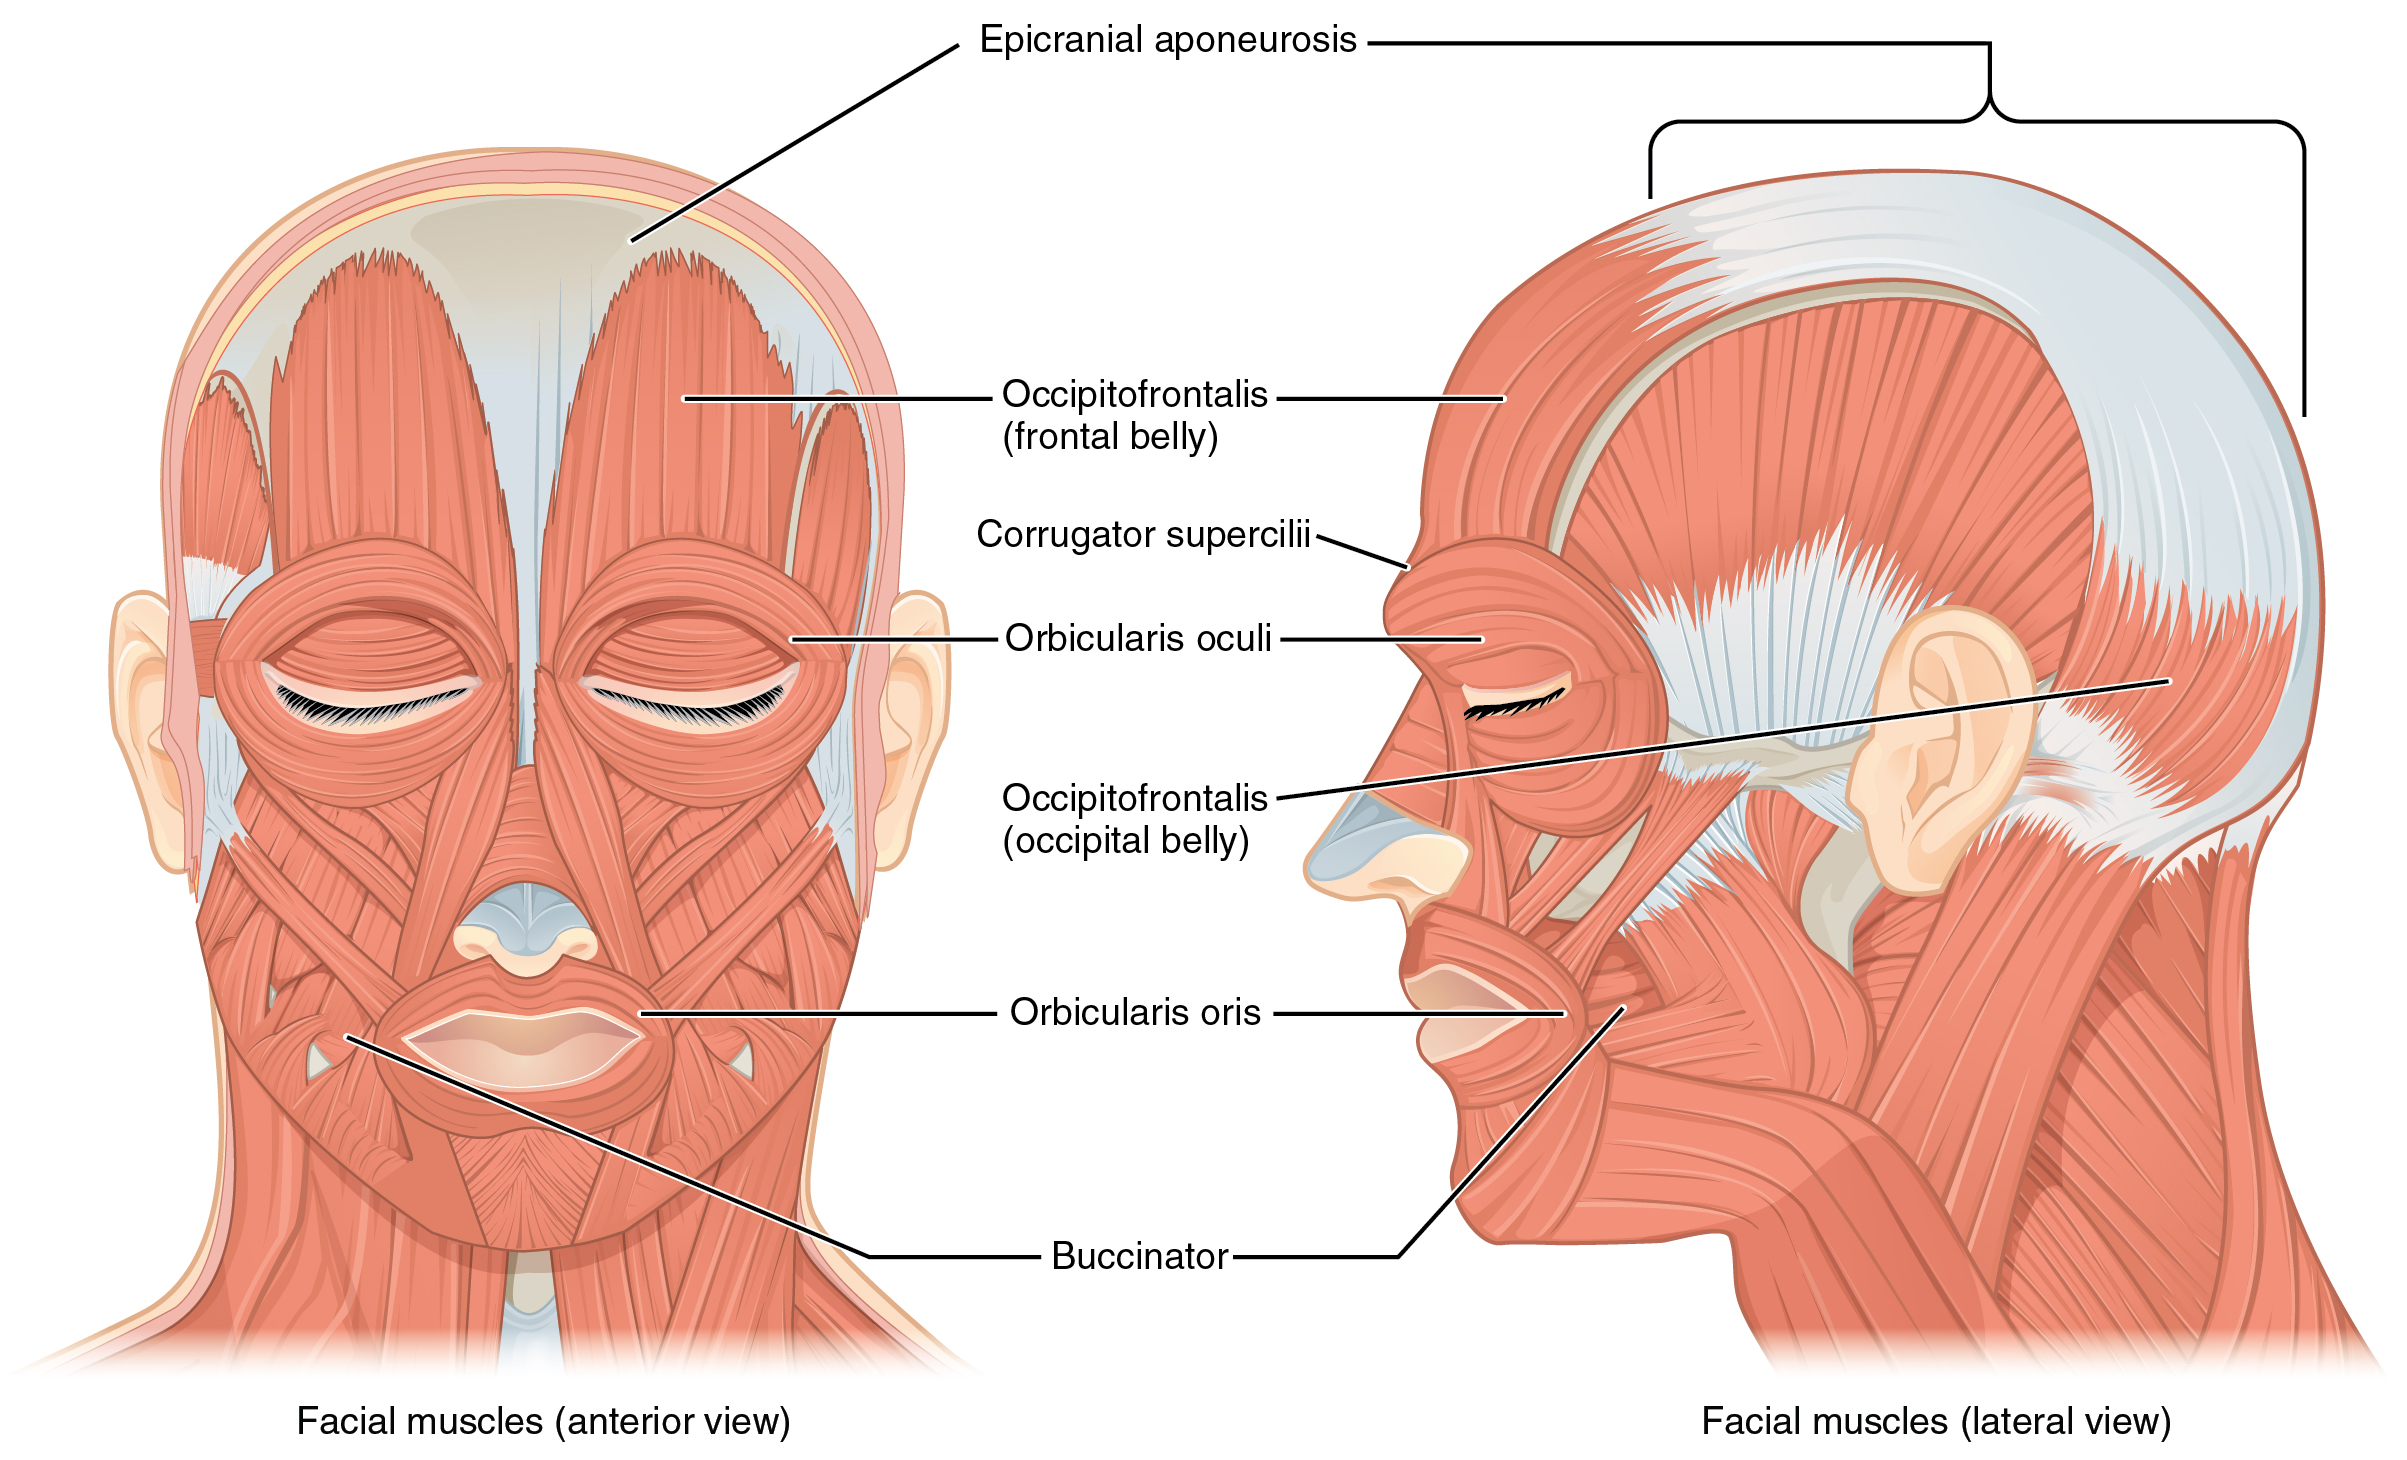 Anterior and lateral views of the muscles of the face